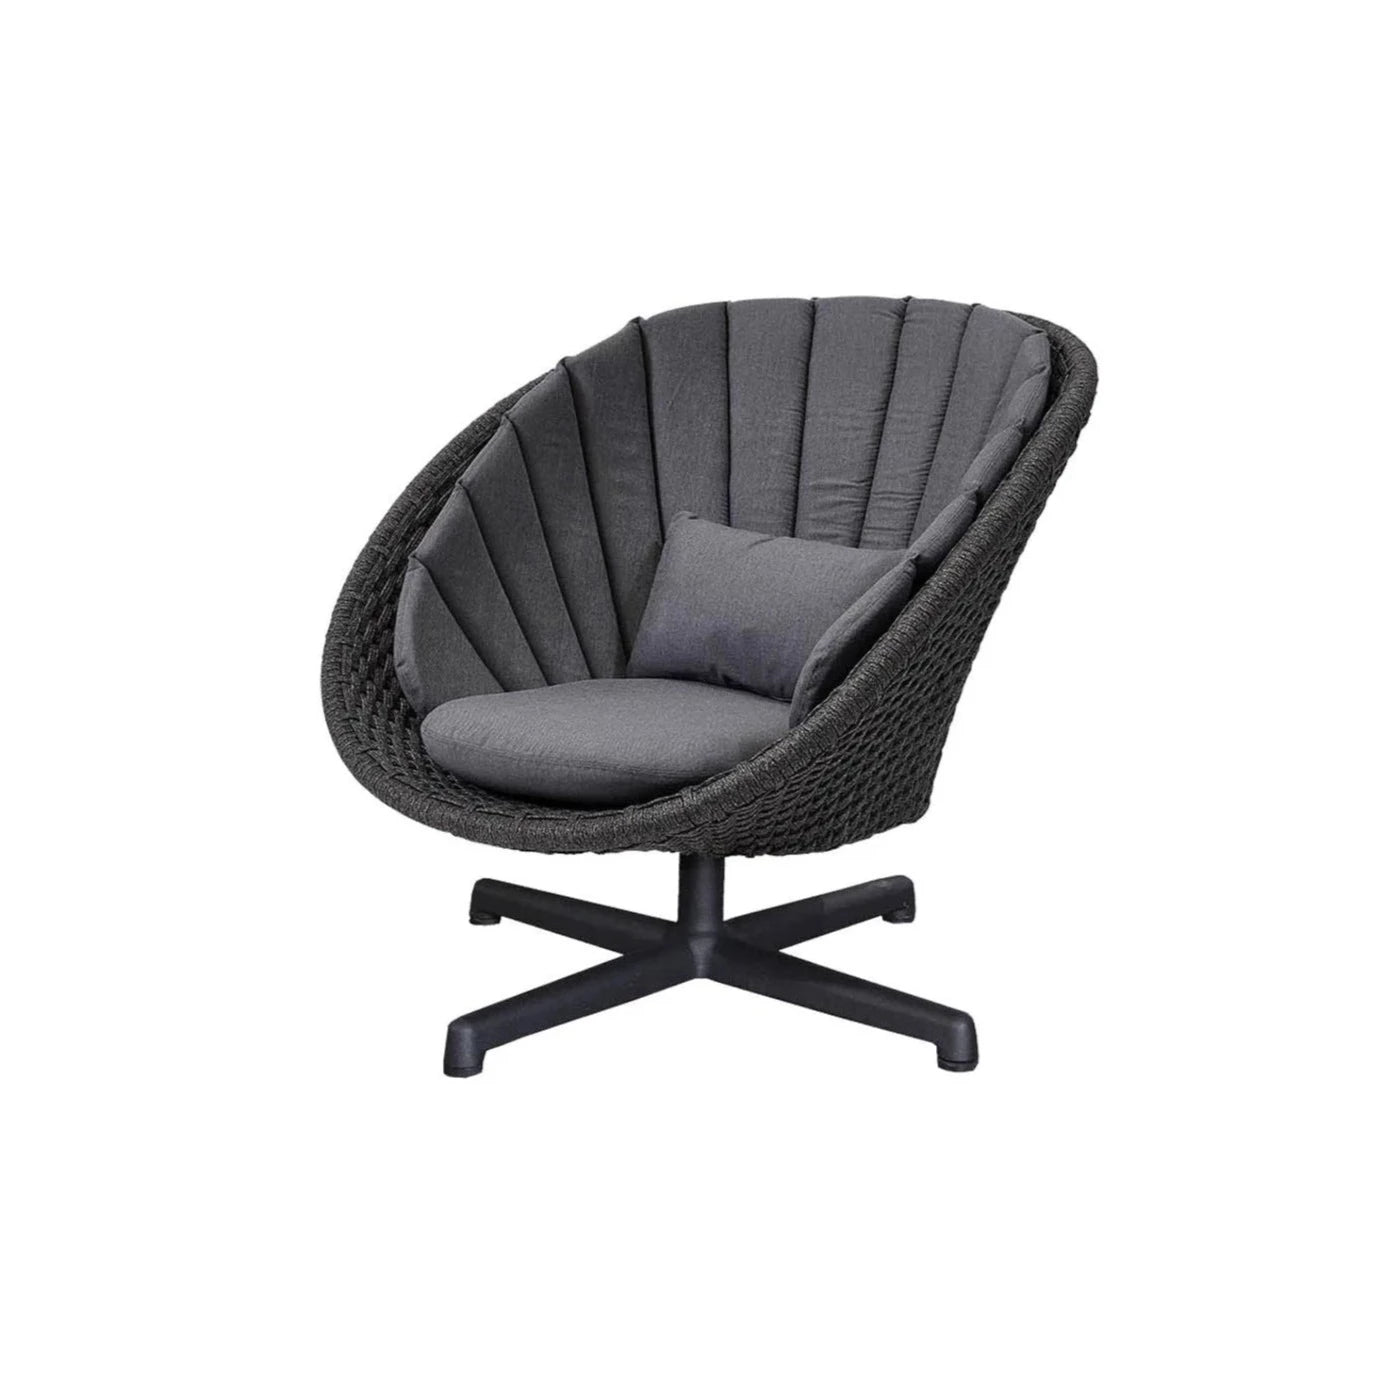 Outdoor Peacock Lounge Chair with Swivel Aluminium Base